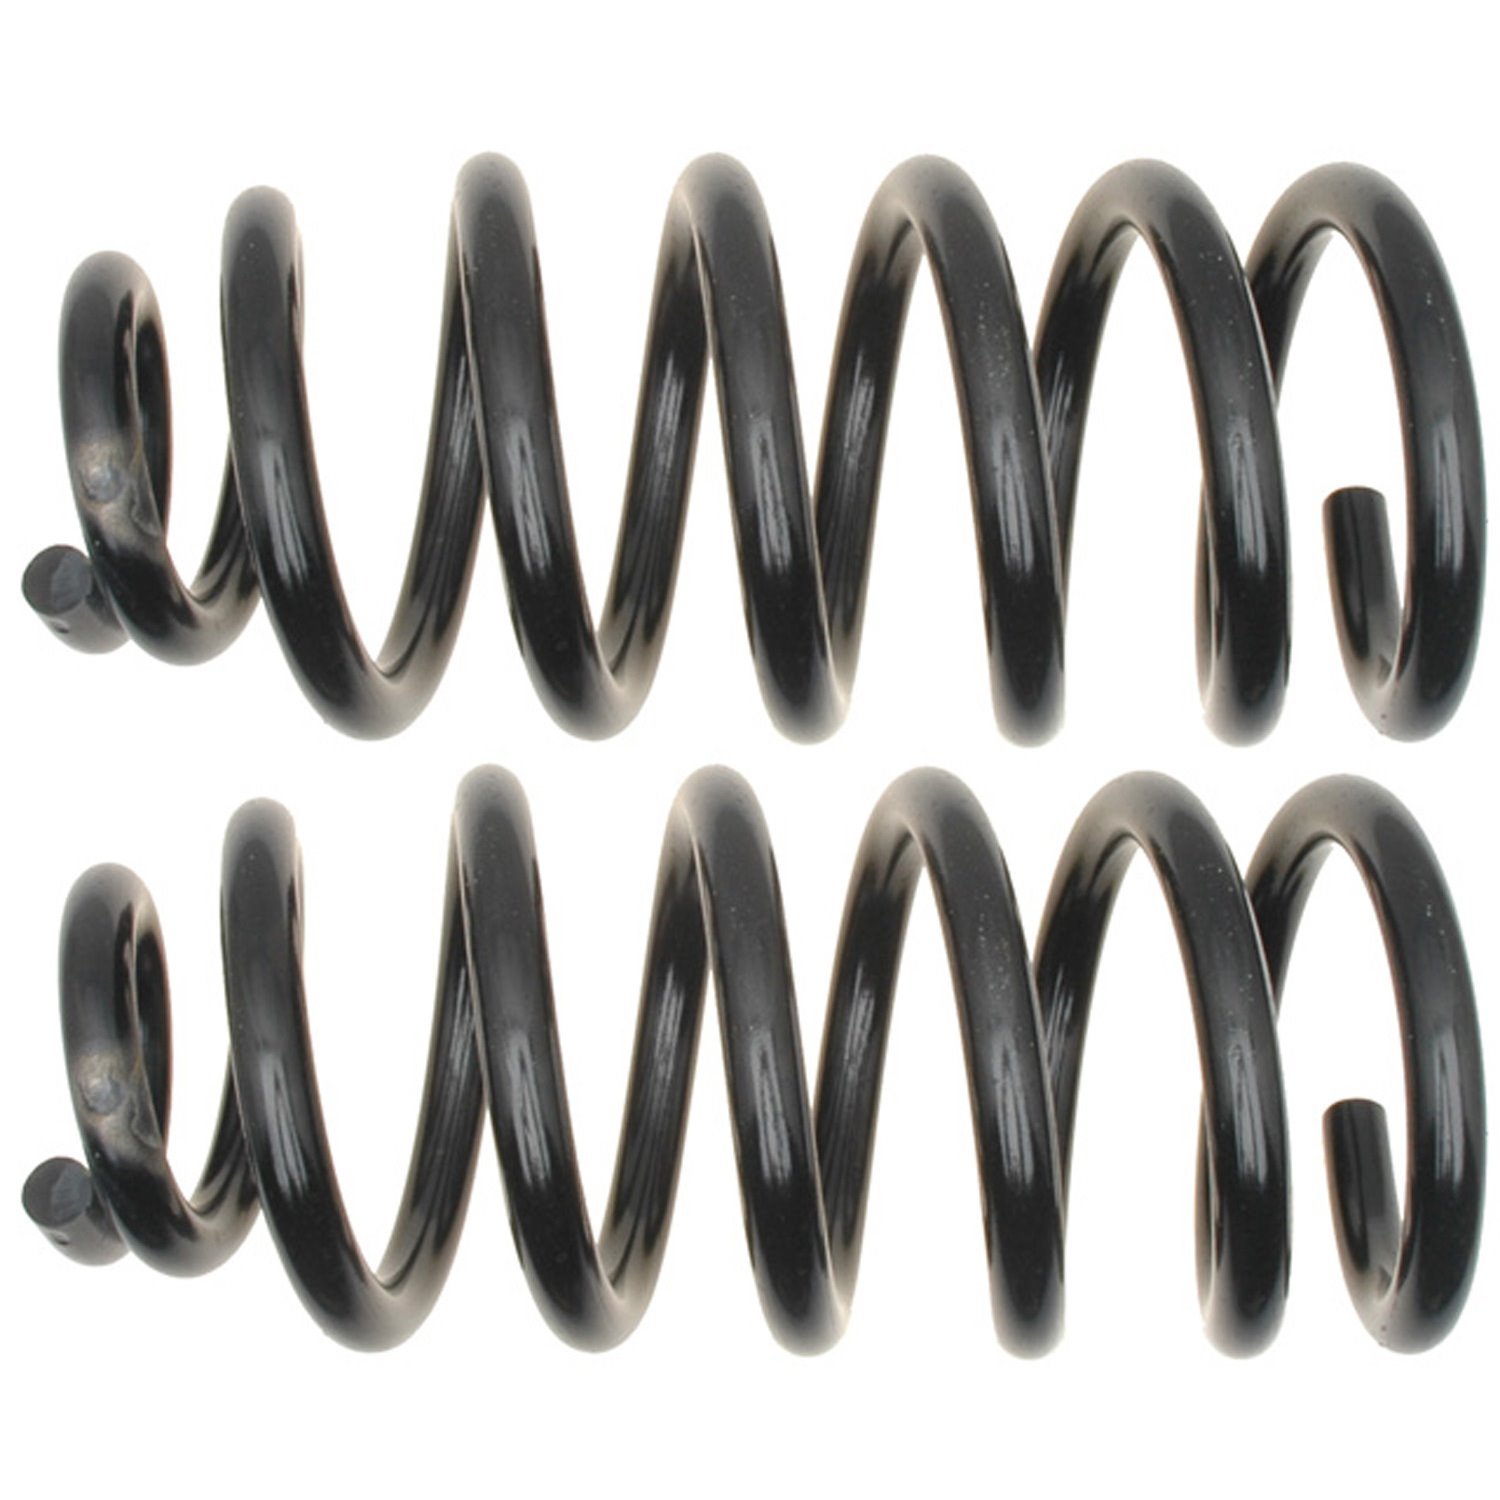 Front Coil Spring Set Fits Select 2007-2018 GM 1500 Truck, Suburban, Tahoe, Yukon 4WD/AWD